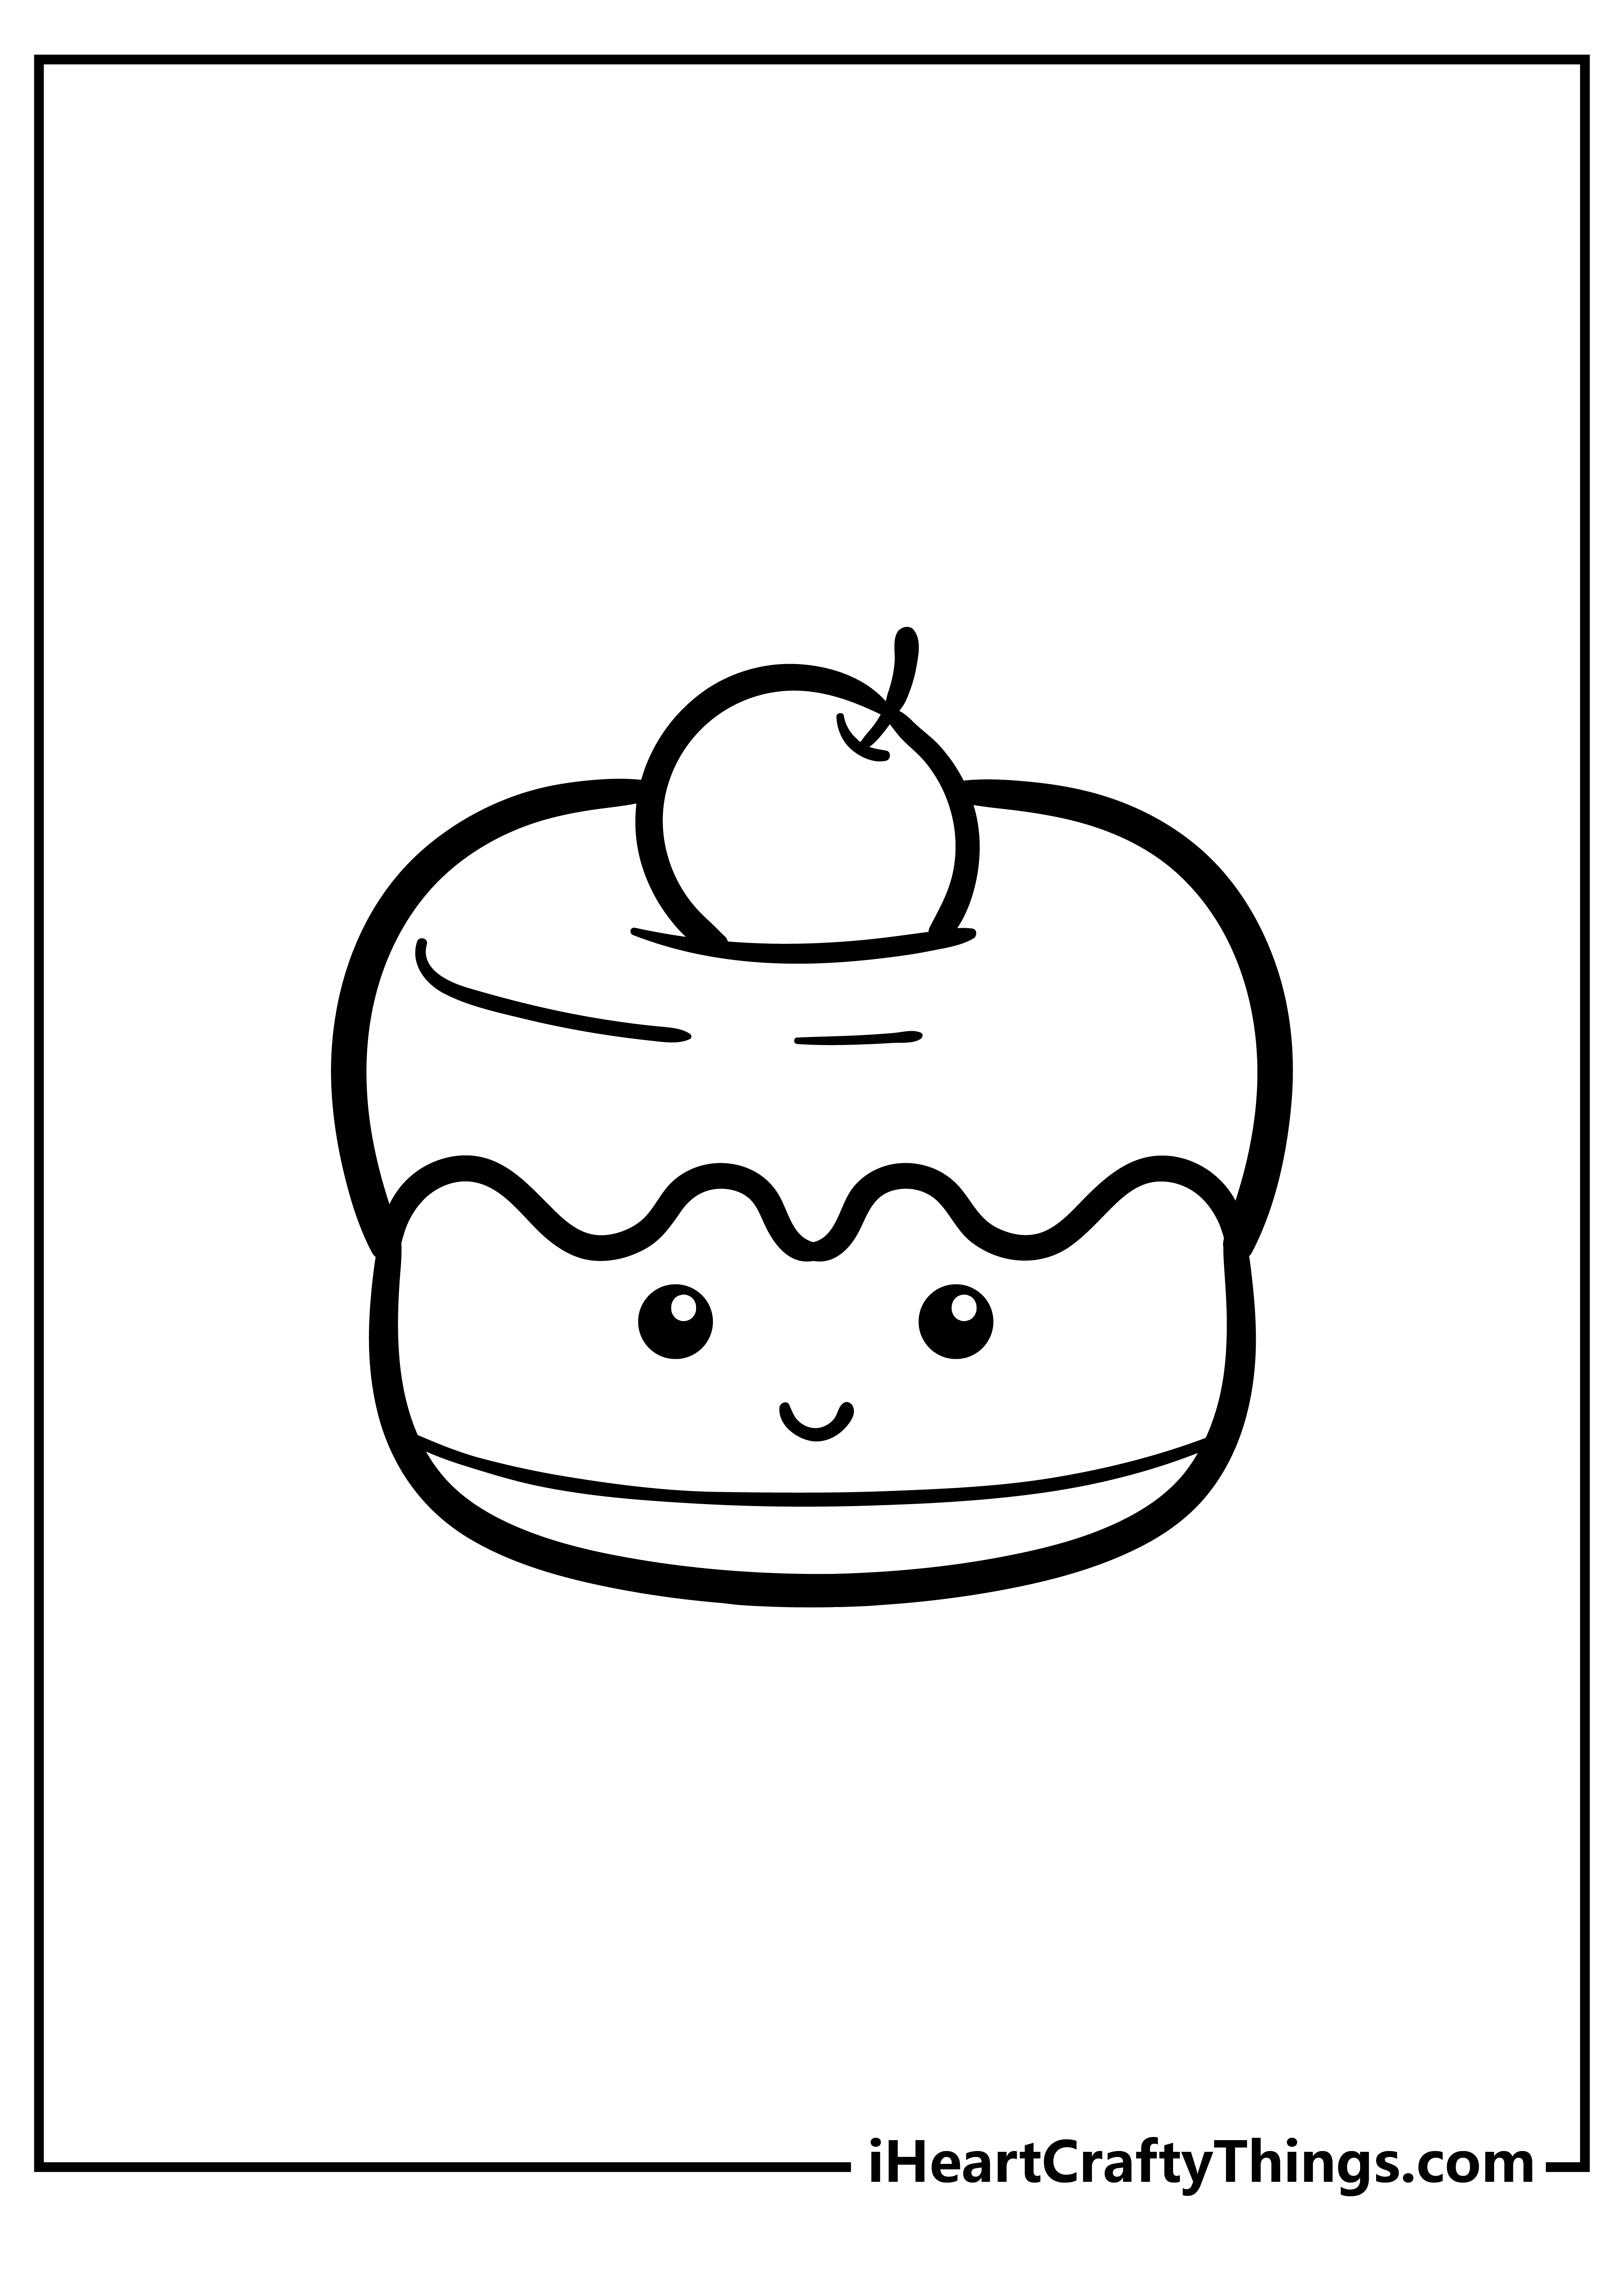 Printable Cute Food Coloring Pages Updated 18